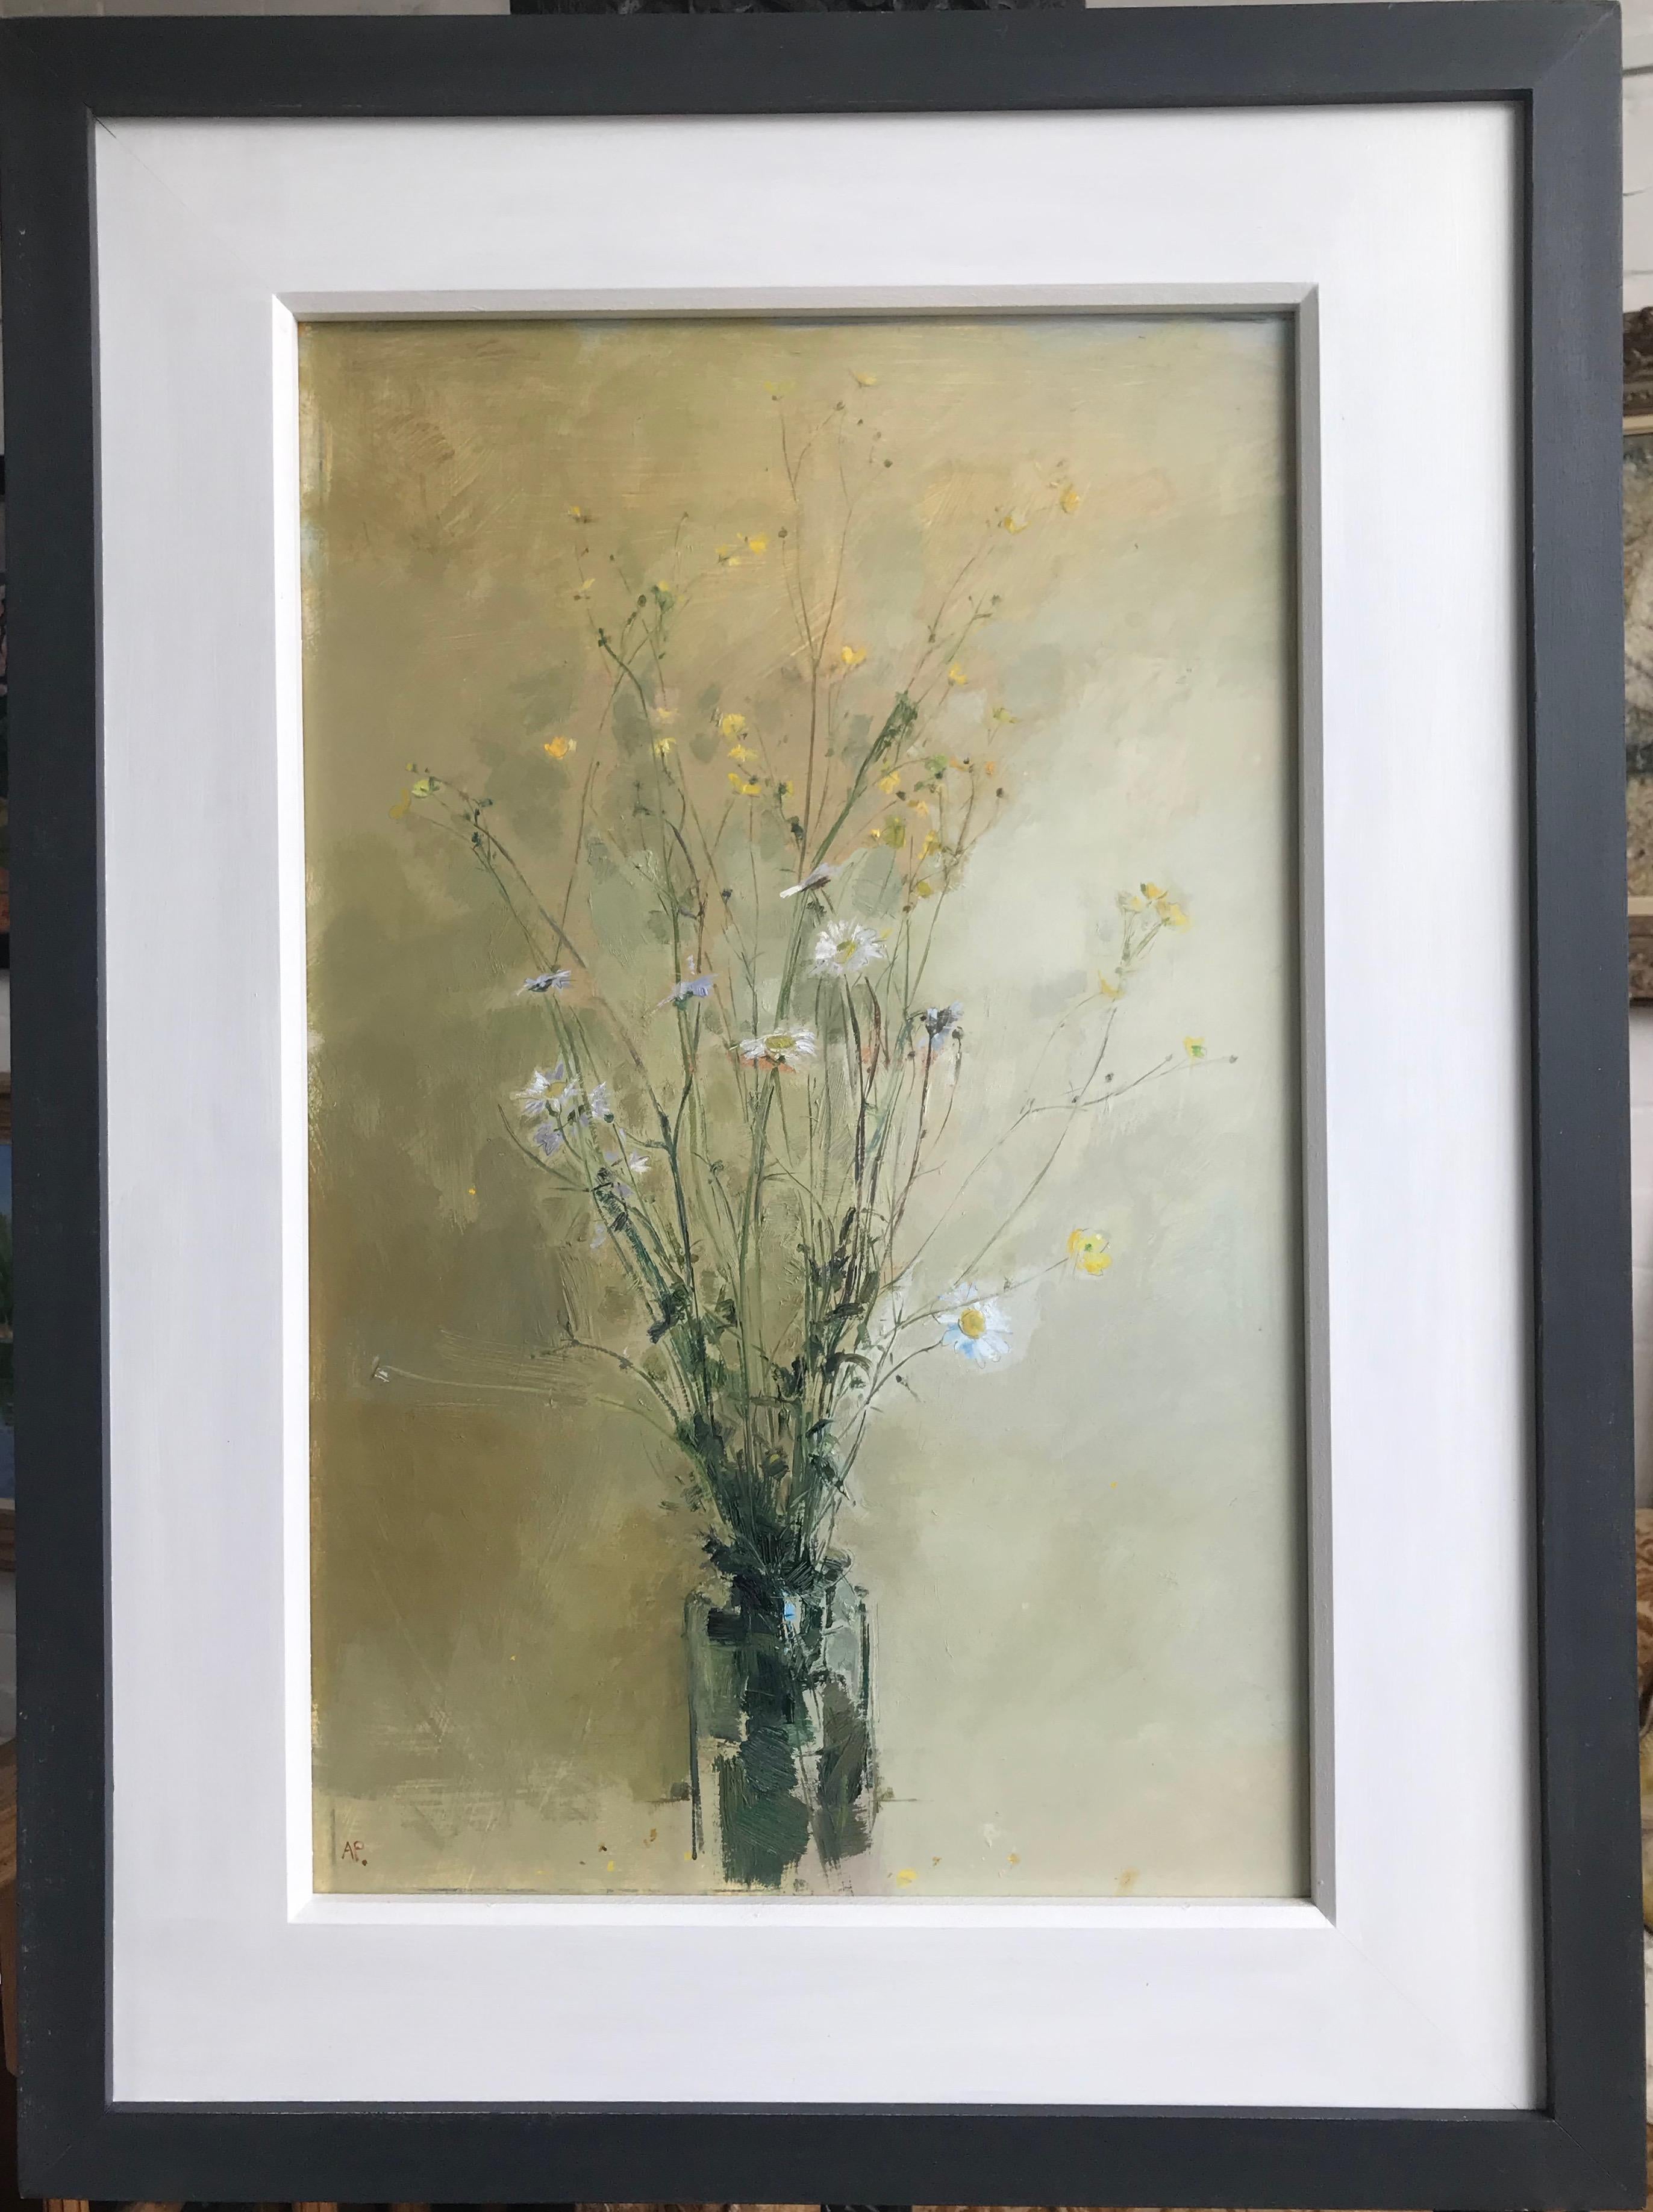 Adrian Parnell (b.1952)
Daisies and Buttercups, 
Signed with initials,
Inscribed with title and date verso
Oil on board,
23 x 14 inches

A delicate and subtly captured study of daisies and buttercups.

Adrian Parnell was born in London and studied